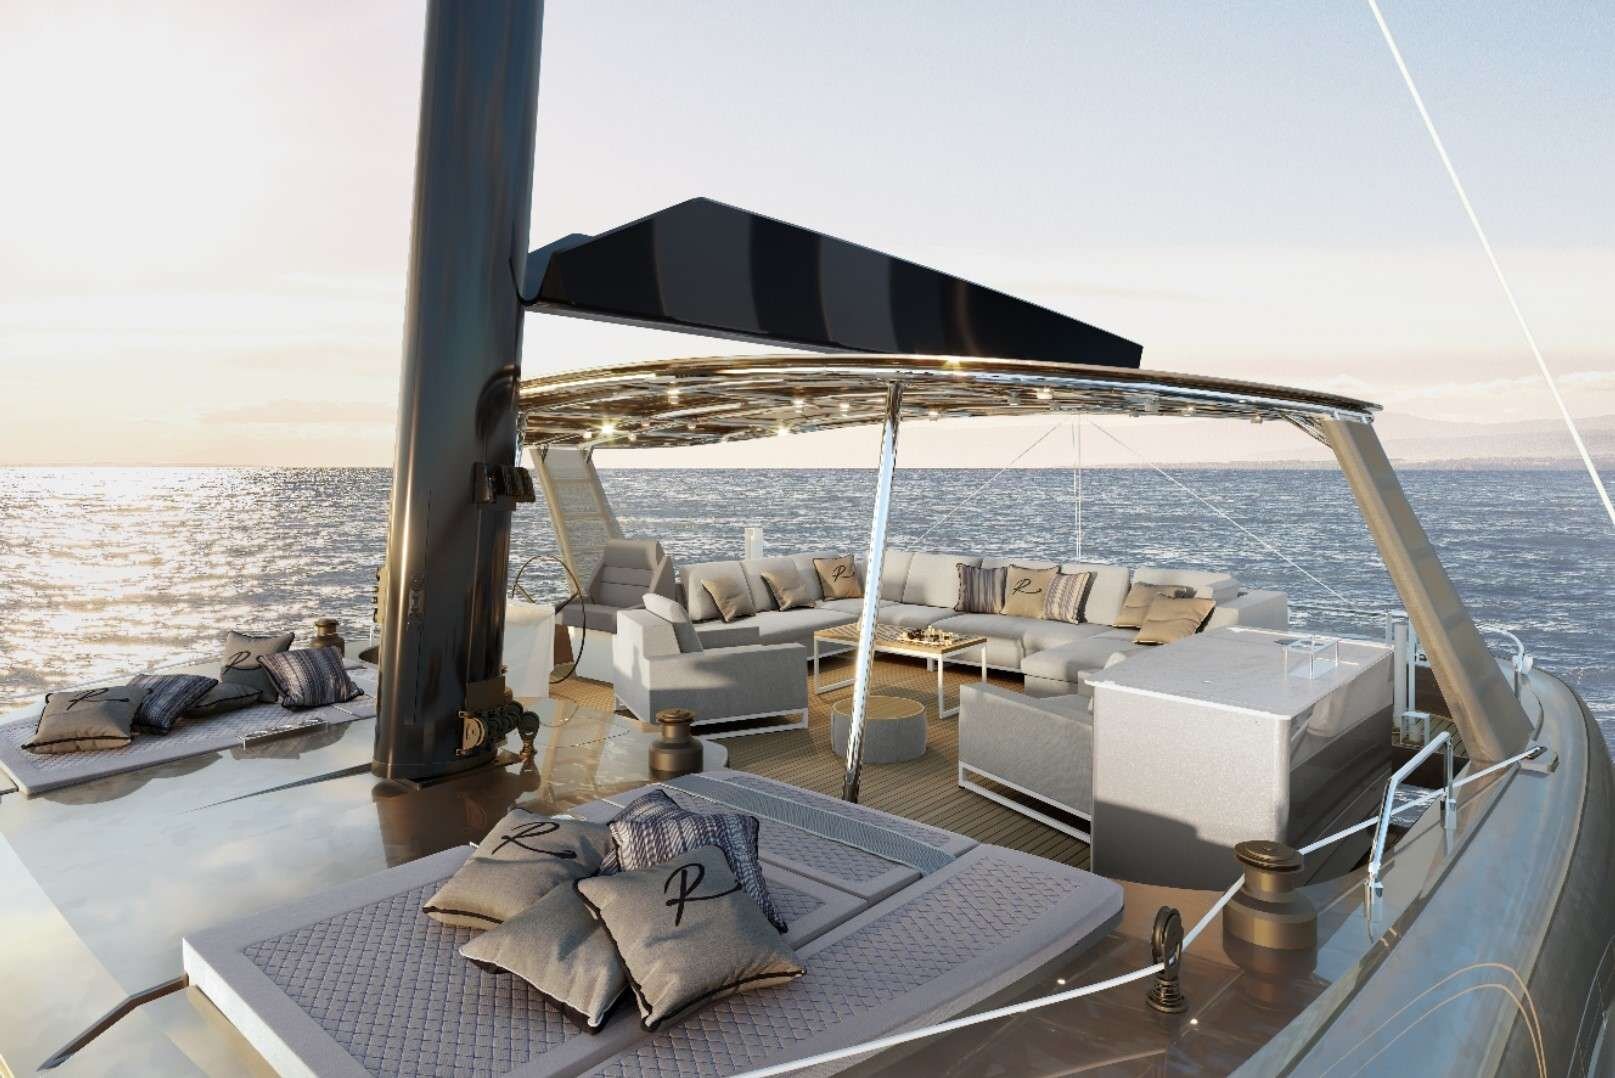 Relentless - Seaduction Yacht Charters